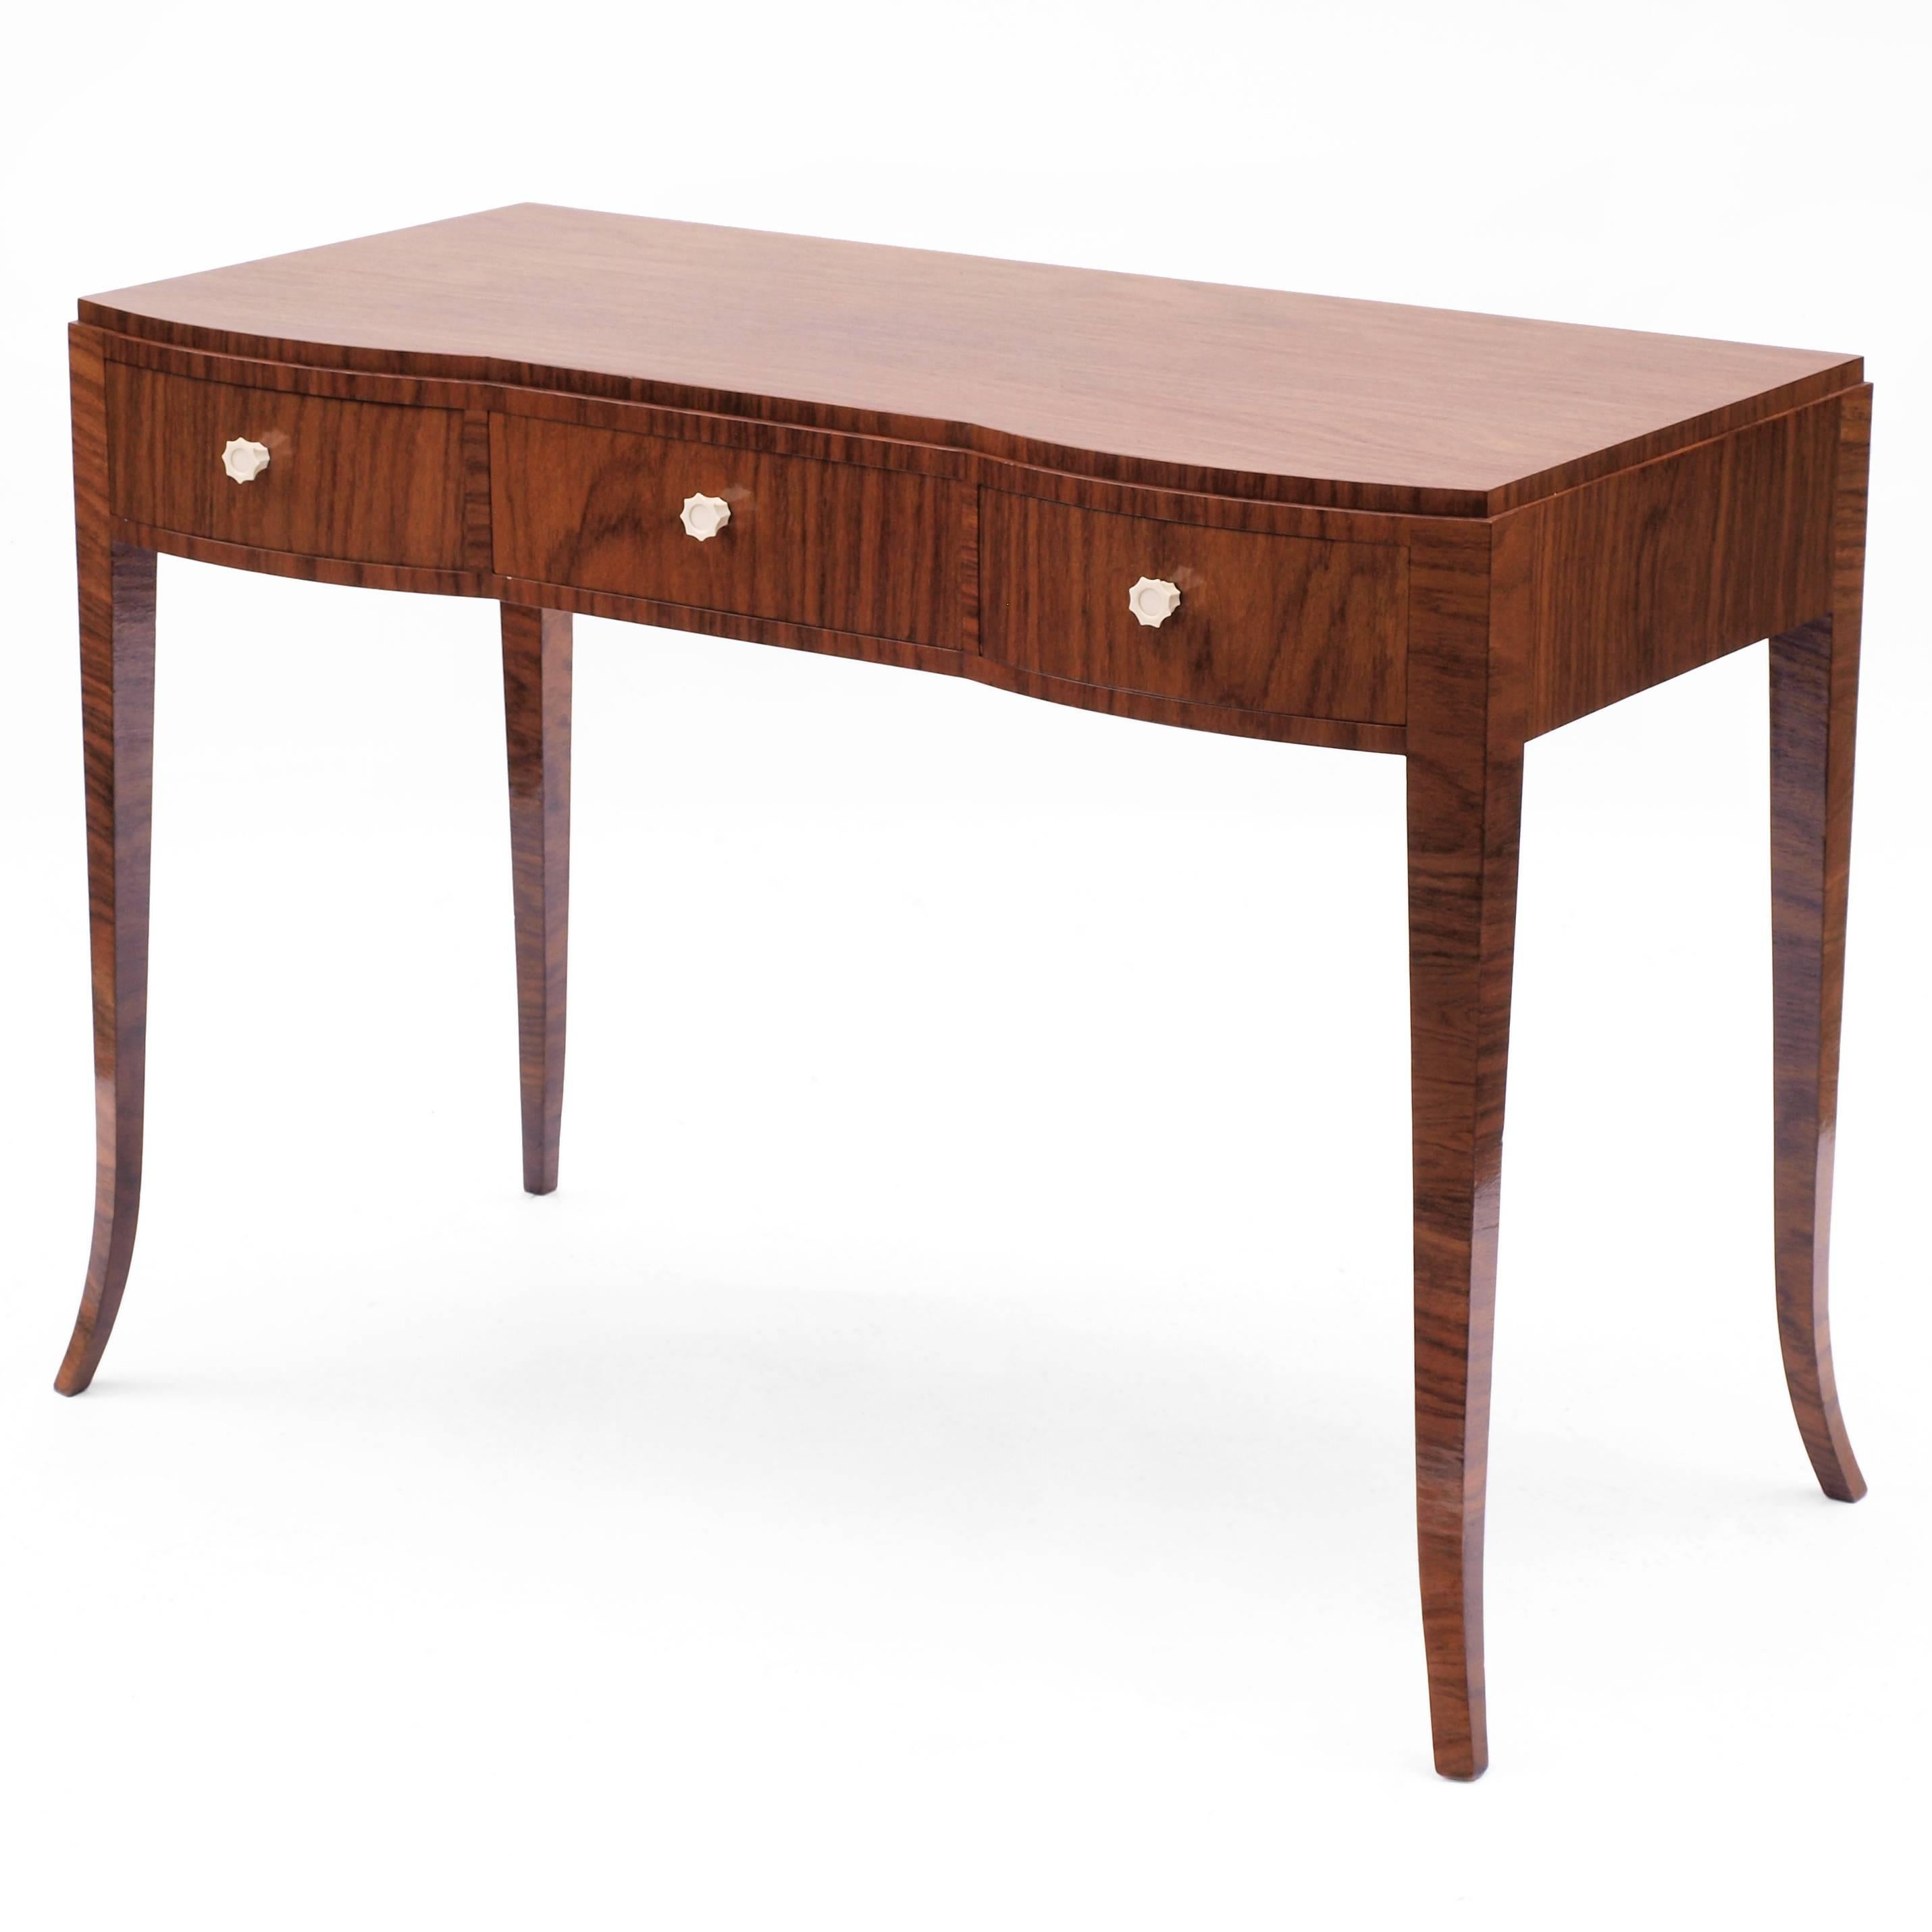 A very fine writing desk by Andre Domin & Marcel Genevriere for Maison Dominique, circa 1925.

Finished in Macassar with turned bone handles in the shape of a fluted octagon, this piece has a gently curved front with tapered and sweeping